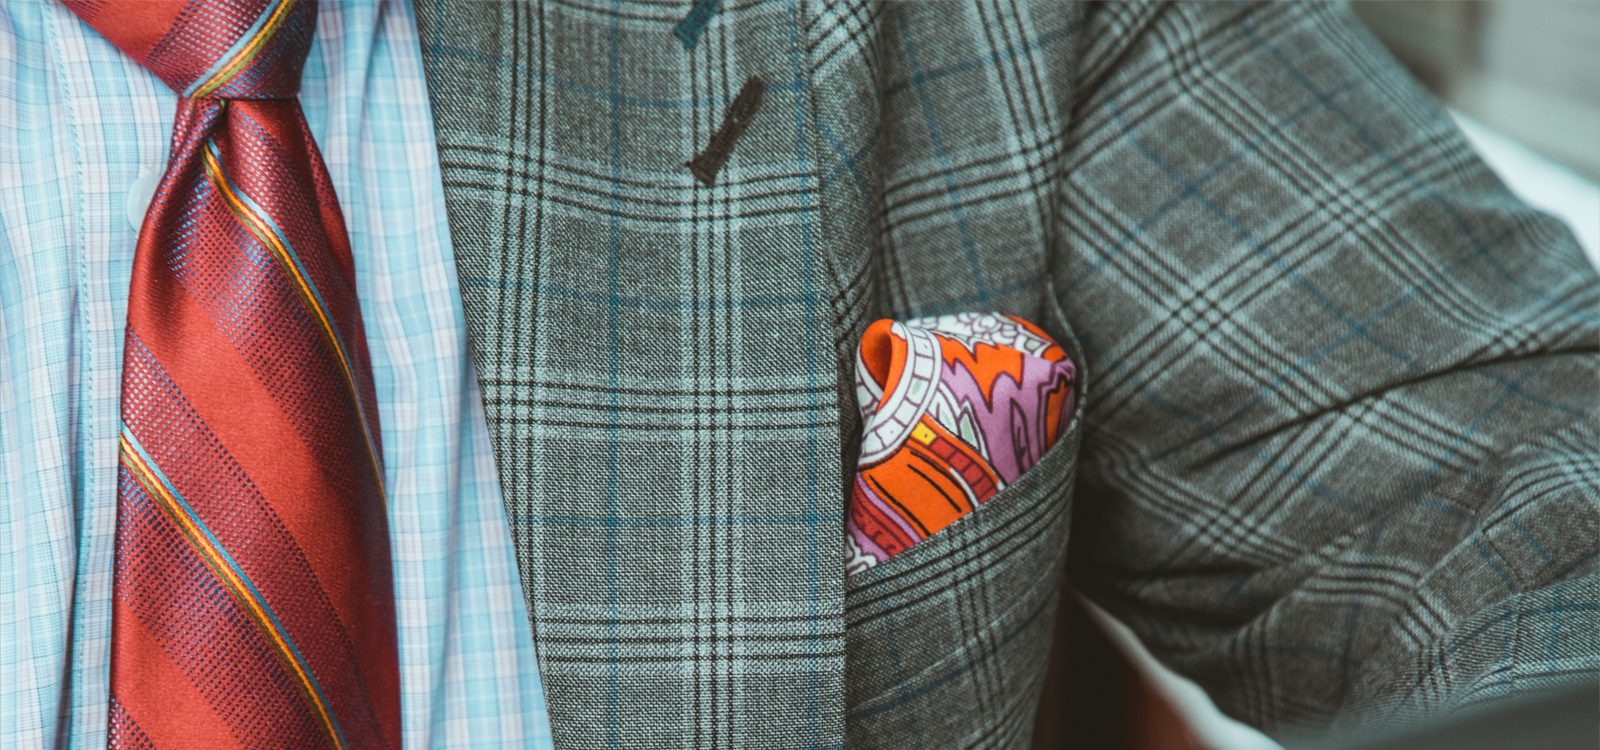 How To Mix And Match Colors, Patterns, and Fabric Like A Pro